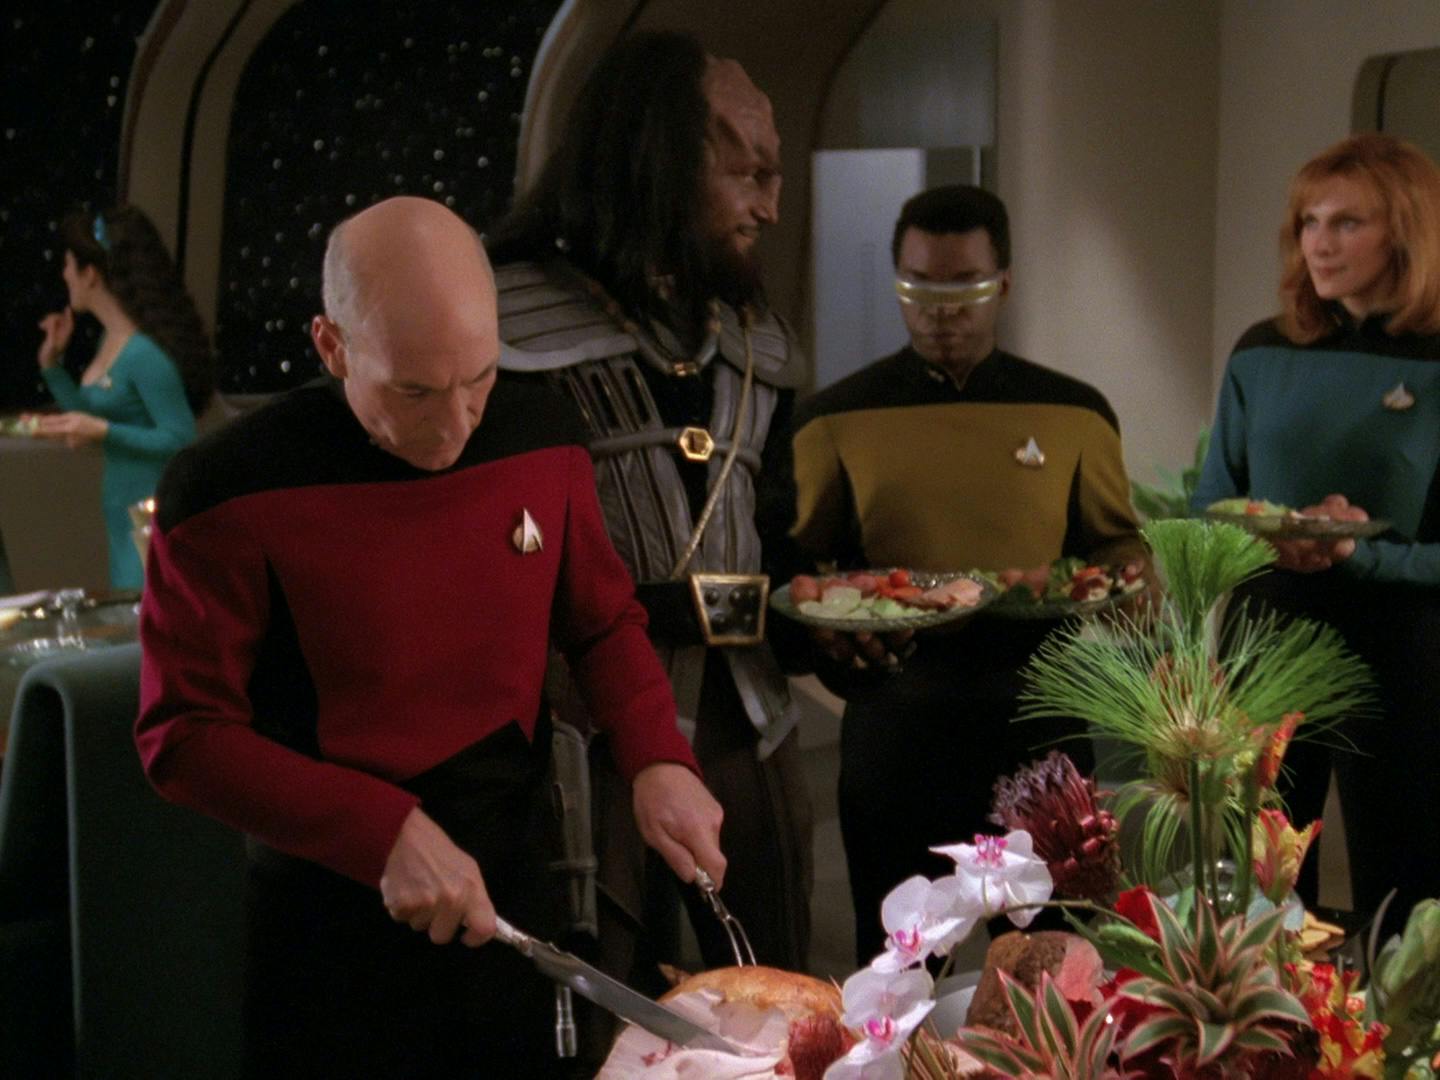 Jean-Luc Picard prepares a meal and carves a turkey for his senior crew along with Kurn in the Enterprise's Observation Lounge in 'Sins of the Father'